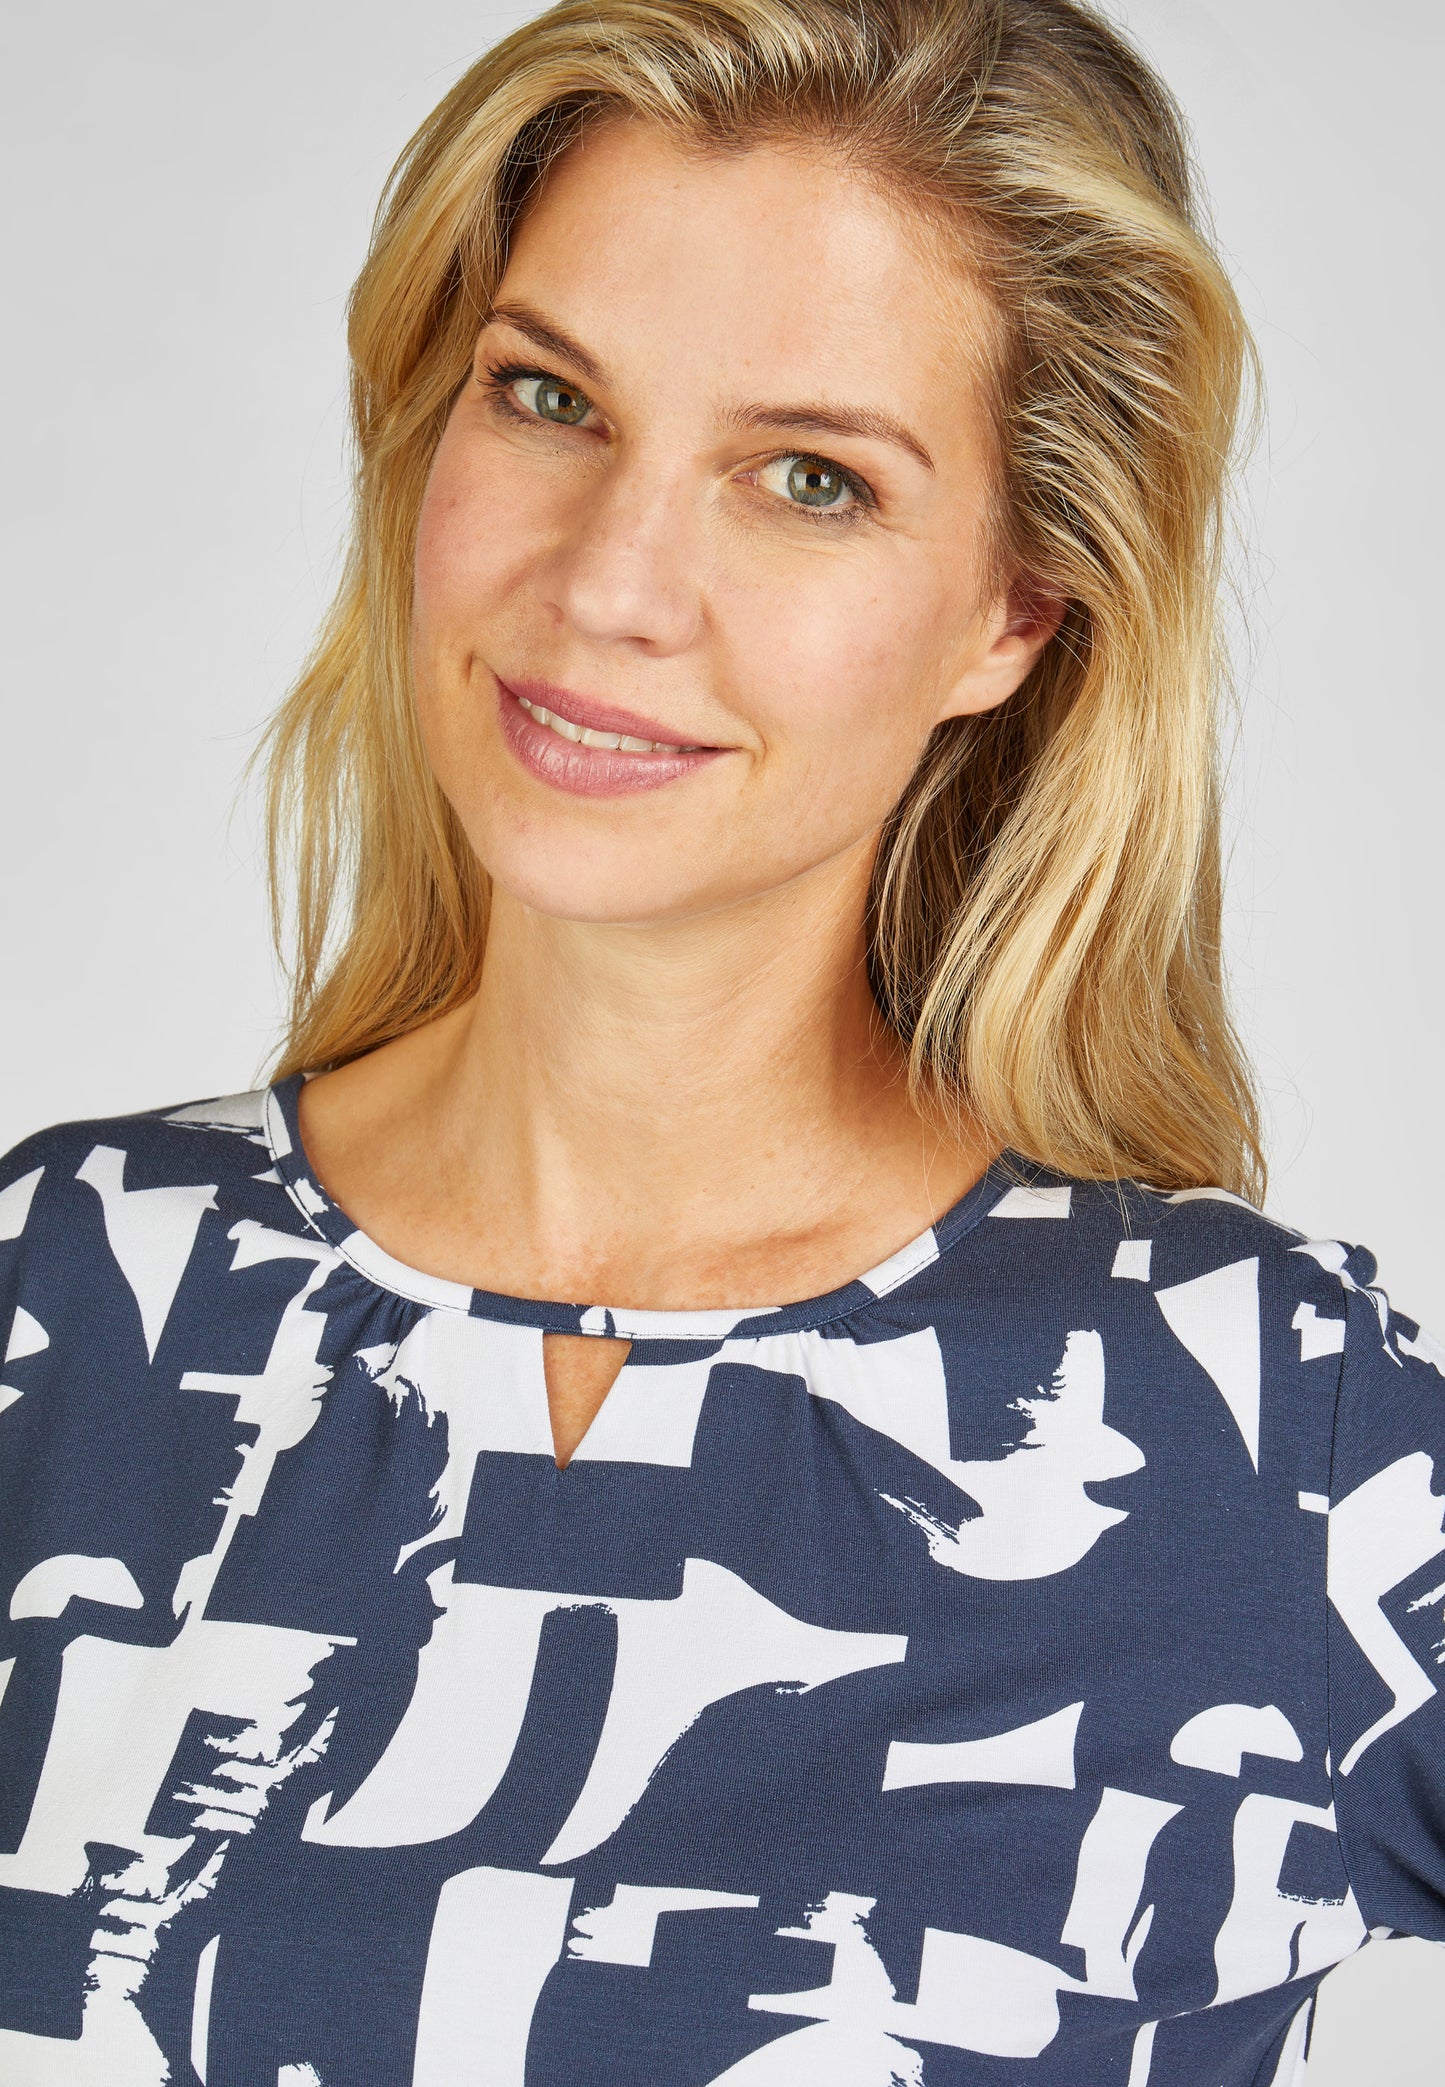 RABE Navy and White Graphic Print Blouse